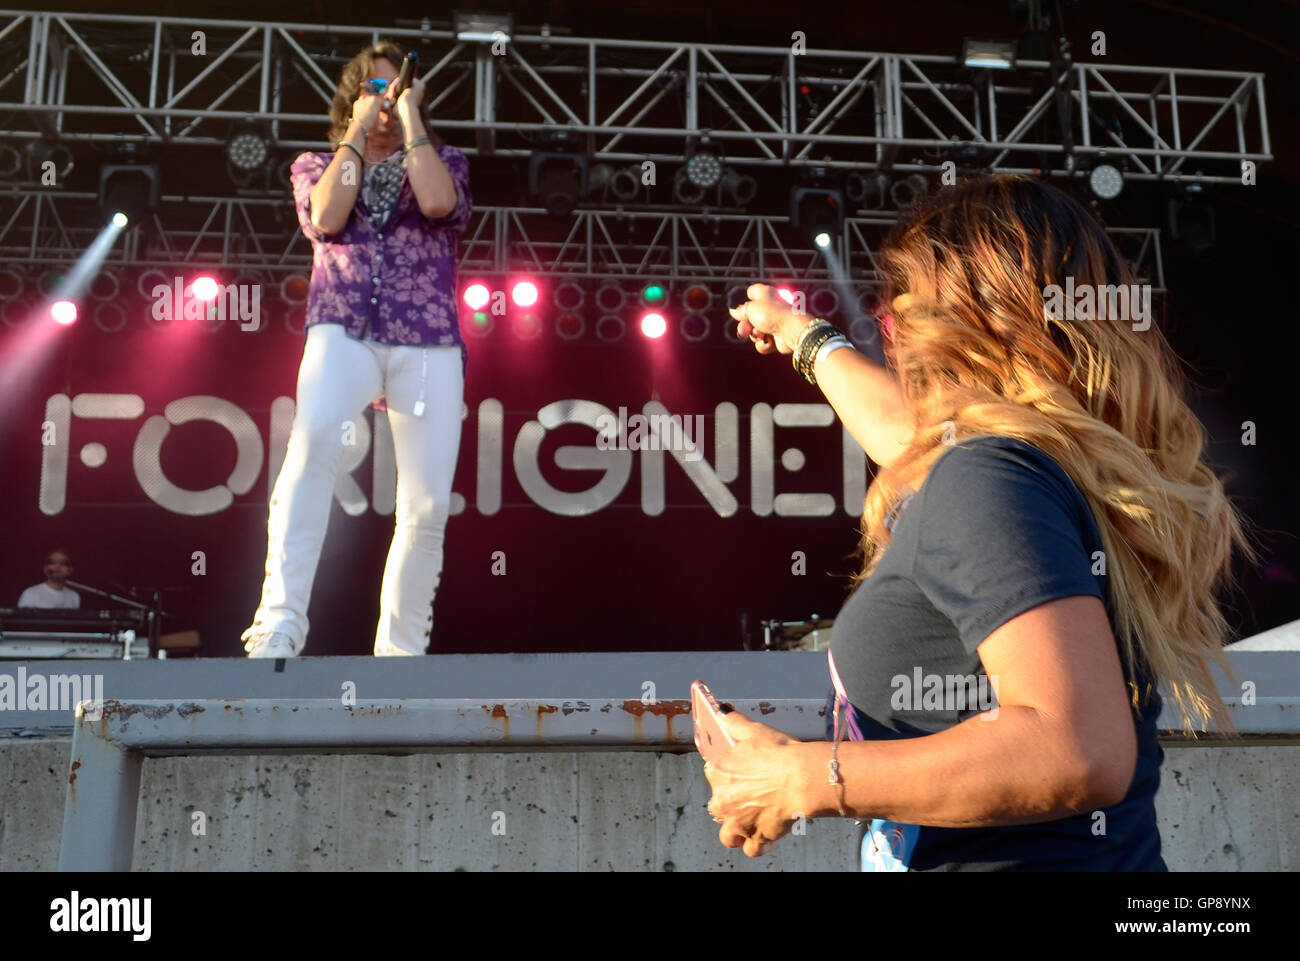 Salem, USA. 26th Aug, 2016. Foreigner singer Kelly Hansen stands on stage at the Oregon State Fair in Salem, USA, 26 August 2016. At this year's State Fair in the state of Oregon, the 40-year-old band 'Foreigner' is carrying on a tradition of sorts: aging rockstars earn extra income at US agricultural fairs. Photo: Valerie Hamilton/dpa/Alamy Live News Stock Photo